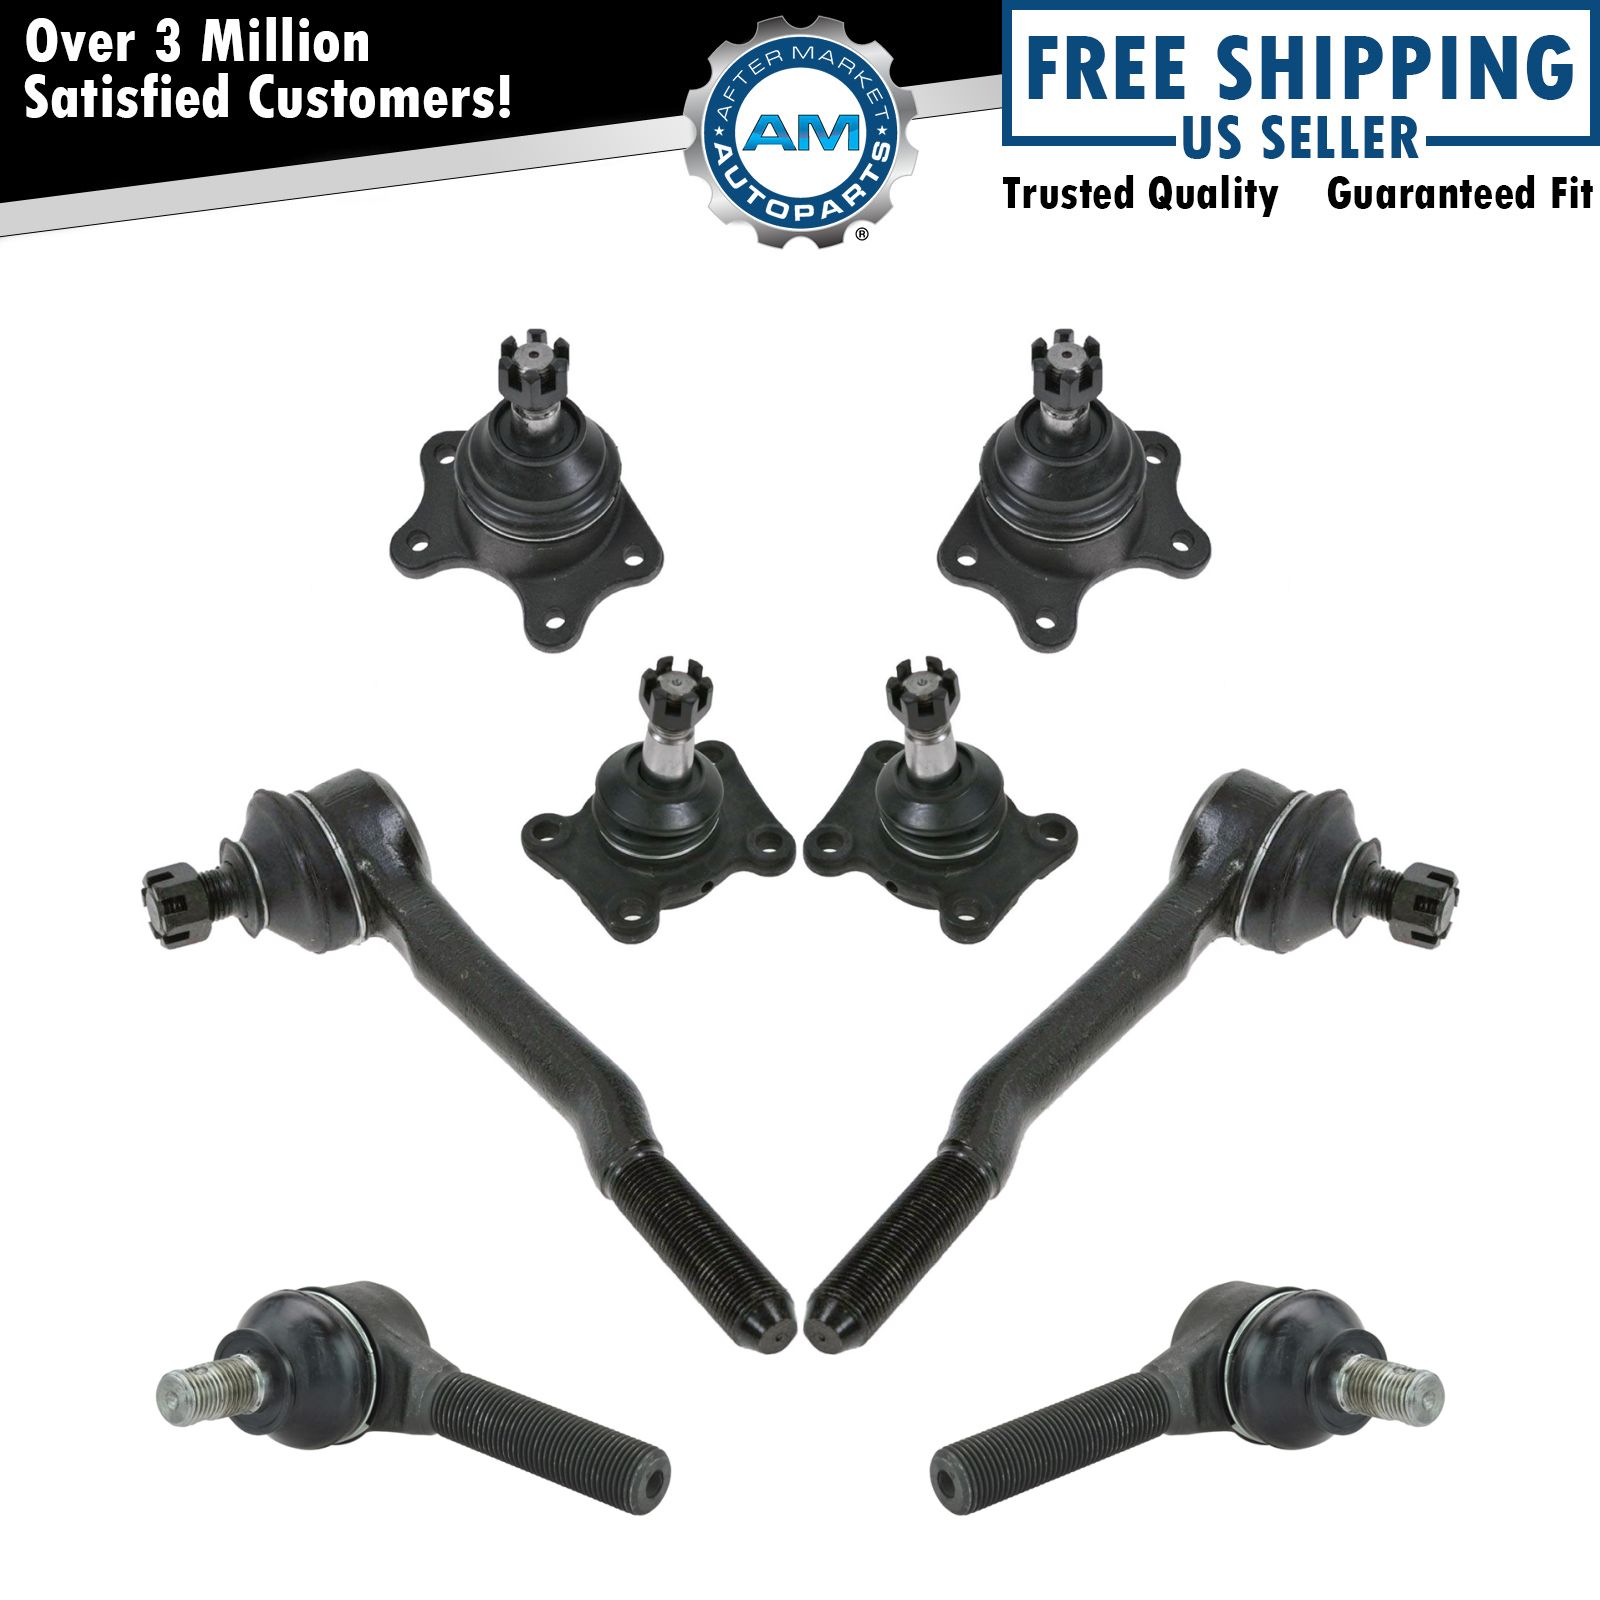 8 Piece Kit Ball Joint Tie Rod LH RH Set for T100 4Runner Pickup Truck SUV 4WD